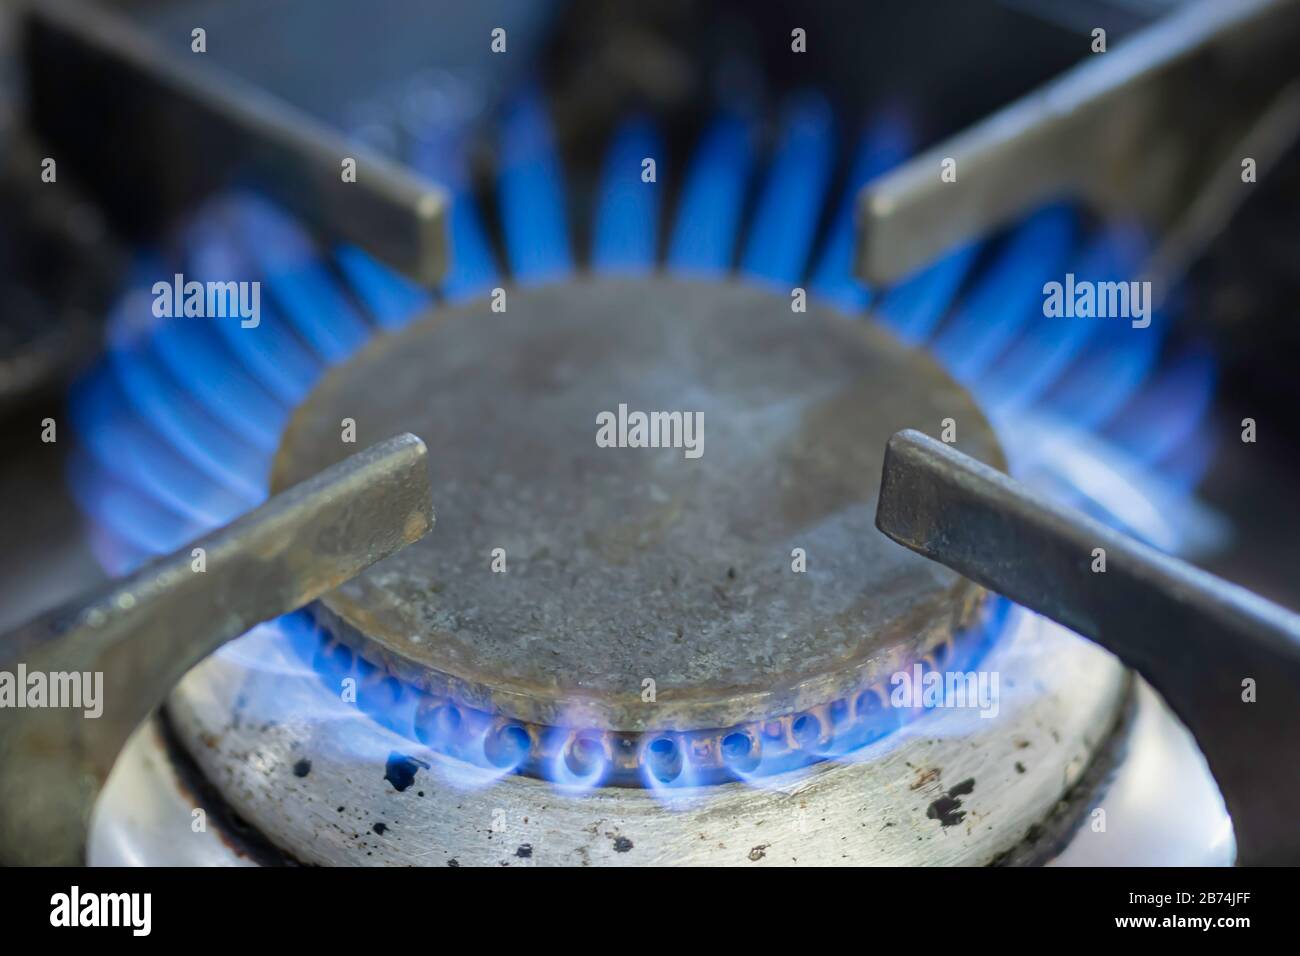 Close up image of gas flame burning on a domestic kitchen hob. Global warming issue.Rising energy prices in the UK.Fossil fuels.Climate change. Stock Photo